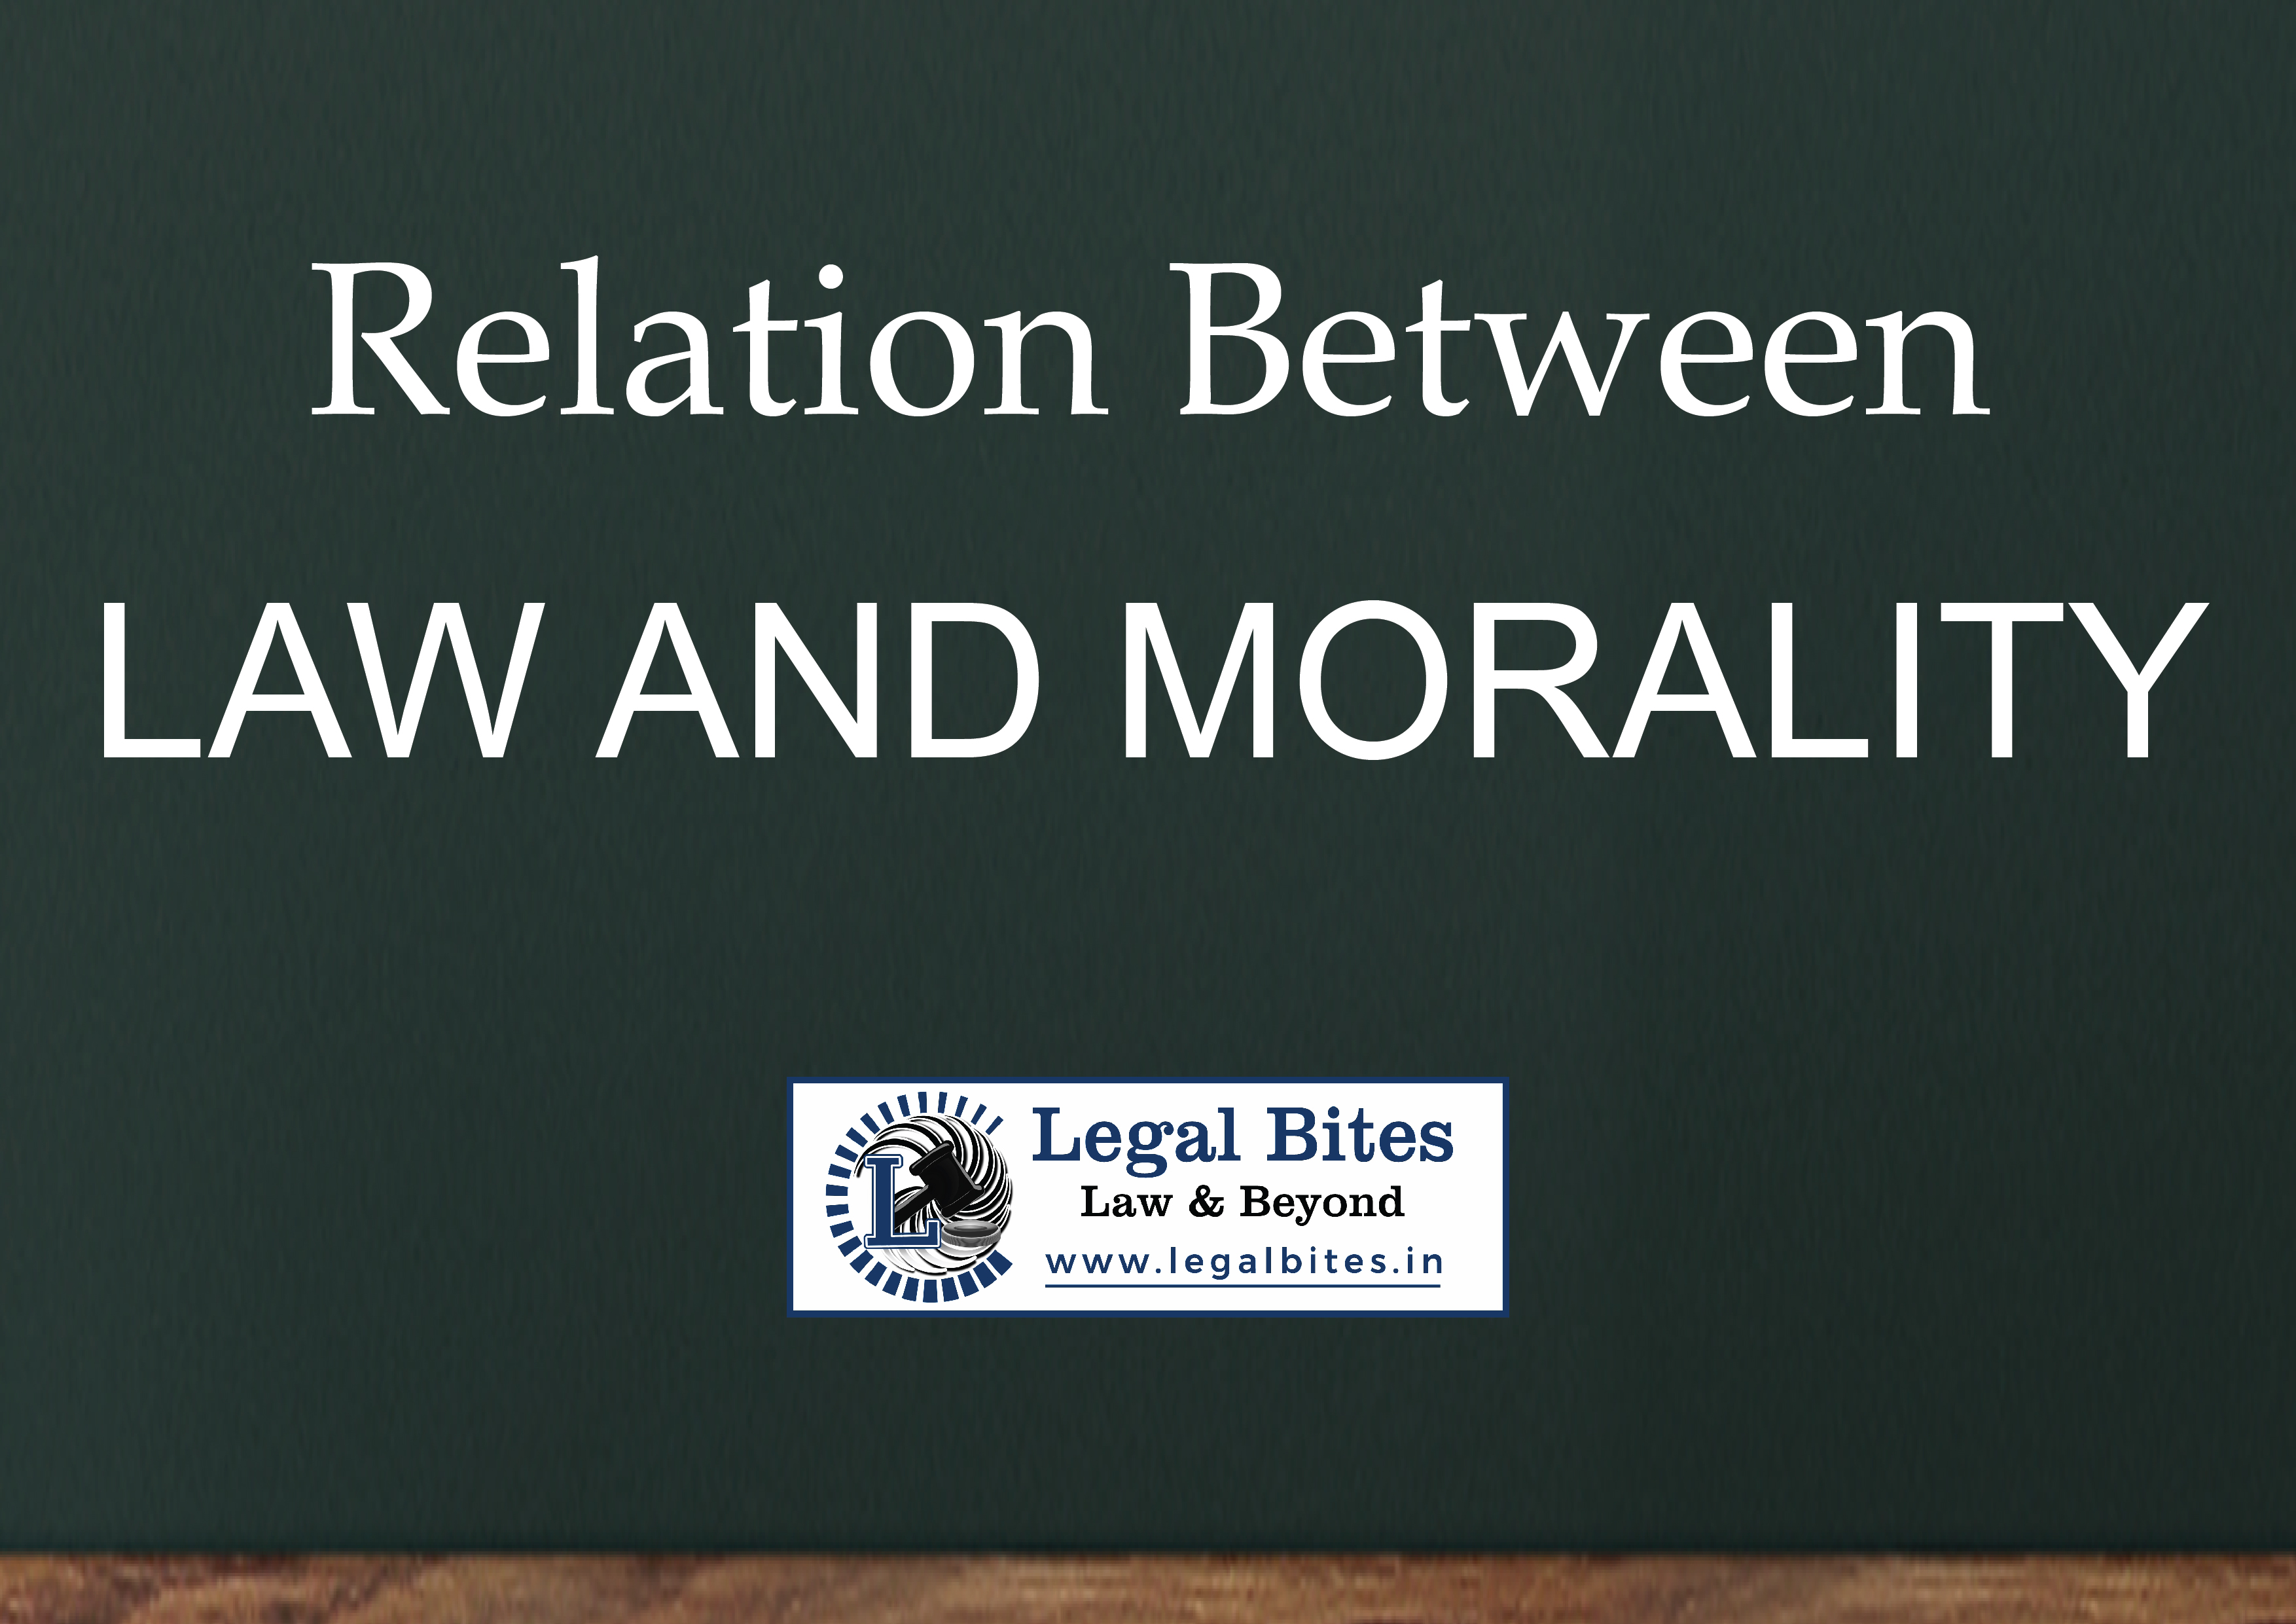 Relation between Law and Morality